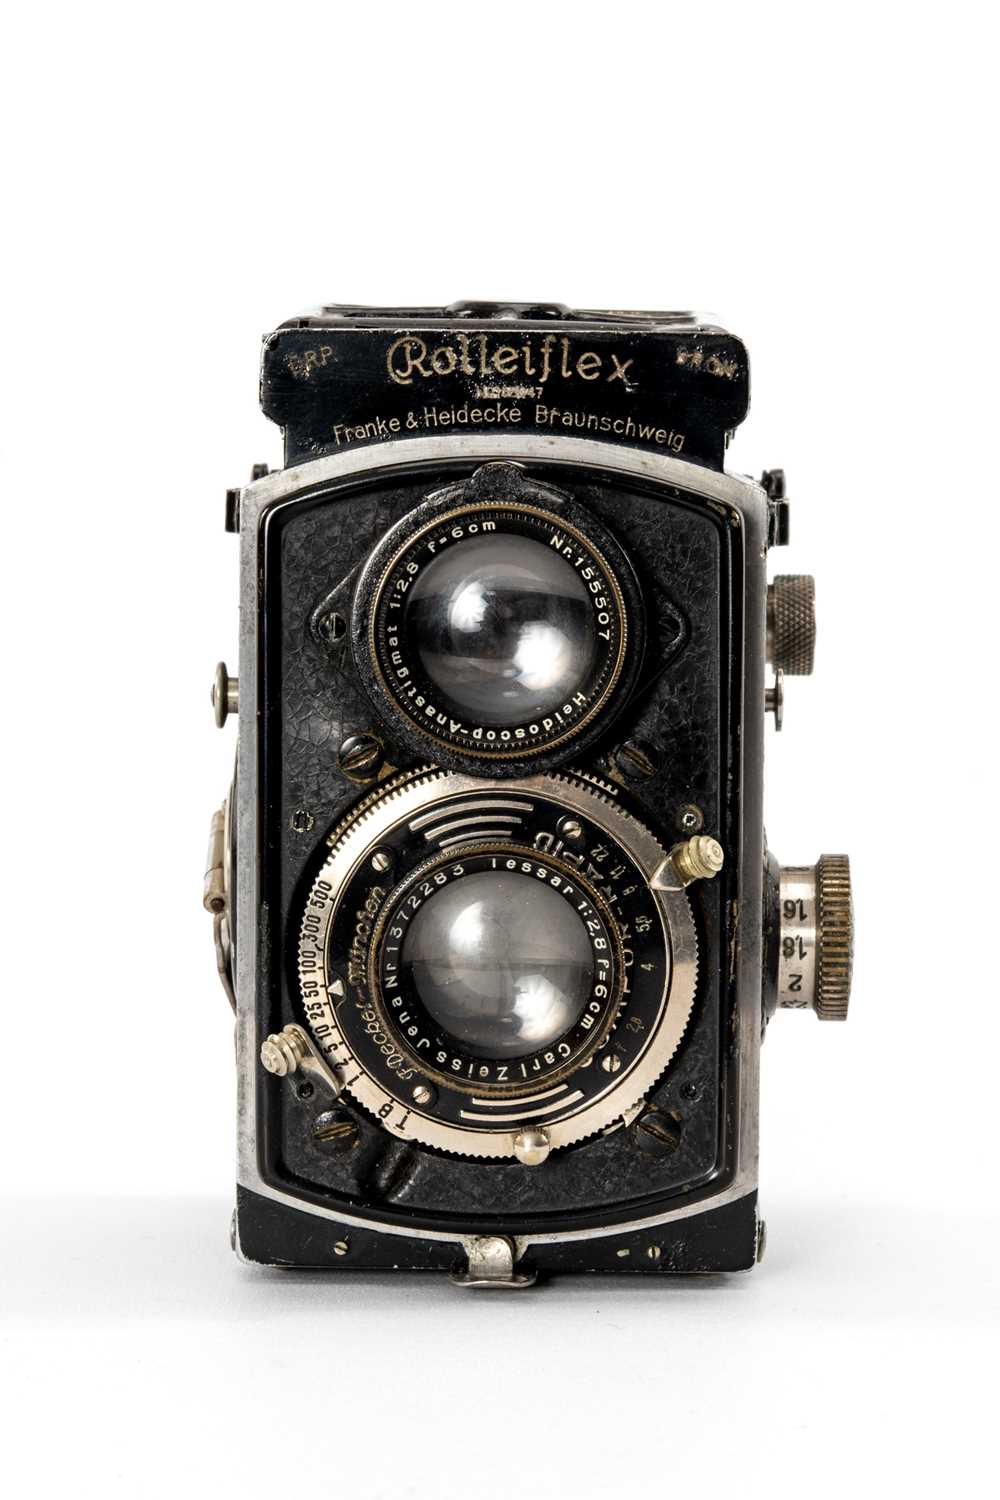 A BABY ROLLEIFLEX 2.8F TLR CAMERA - black, with a Carl Zeiss Jena Tessar f/2.8 6cm lens, serial